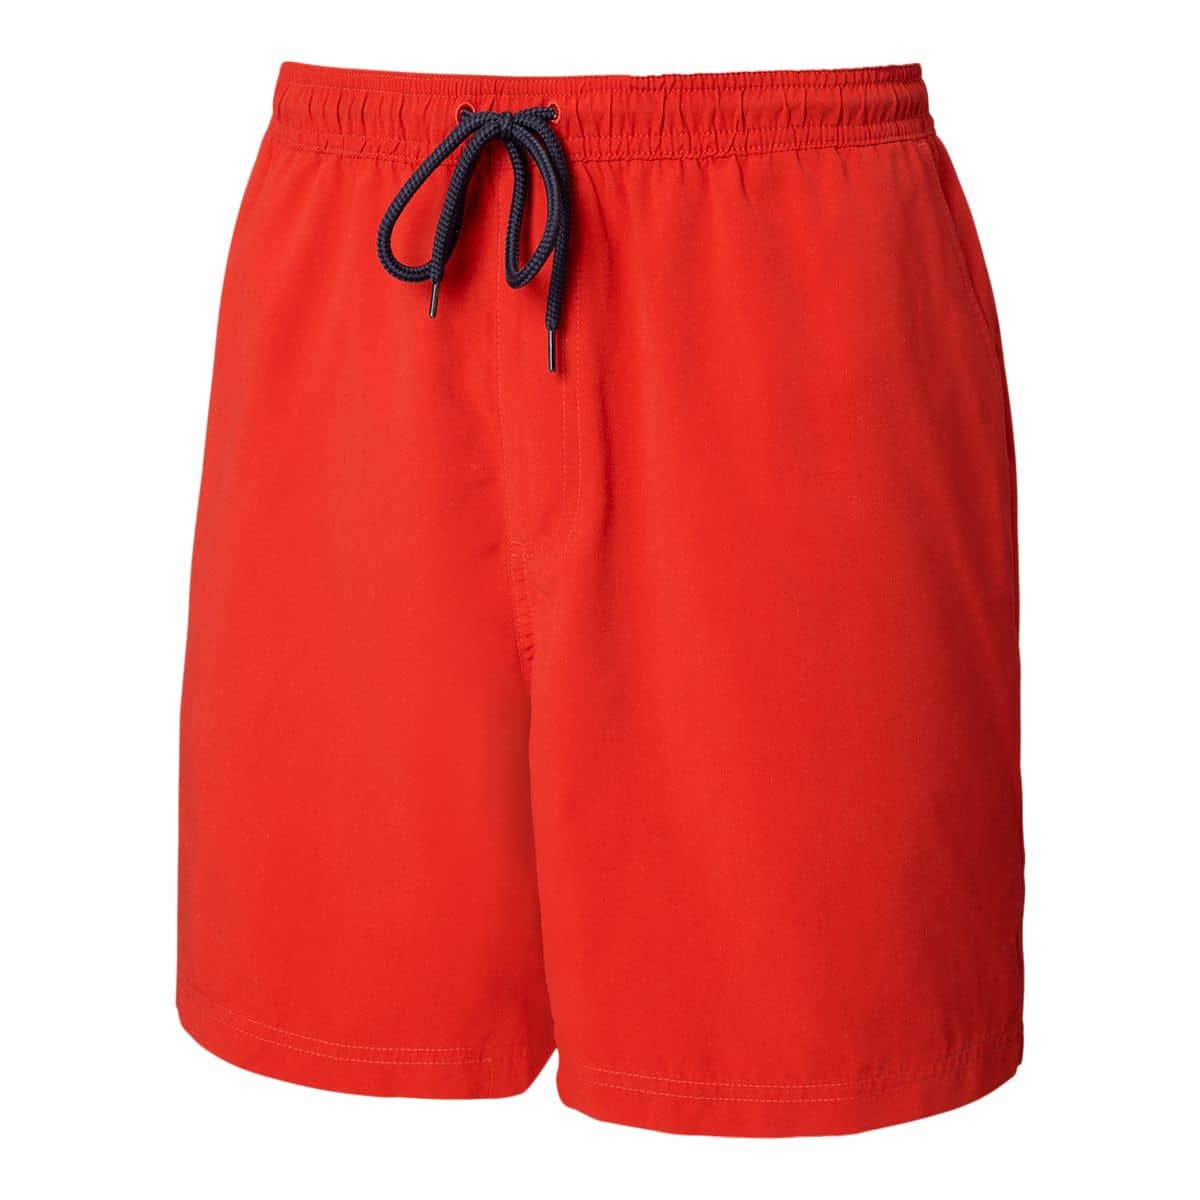 Men's Two-Tone SPORT Lined Shorts - Men's Shorts & Swim - New In